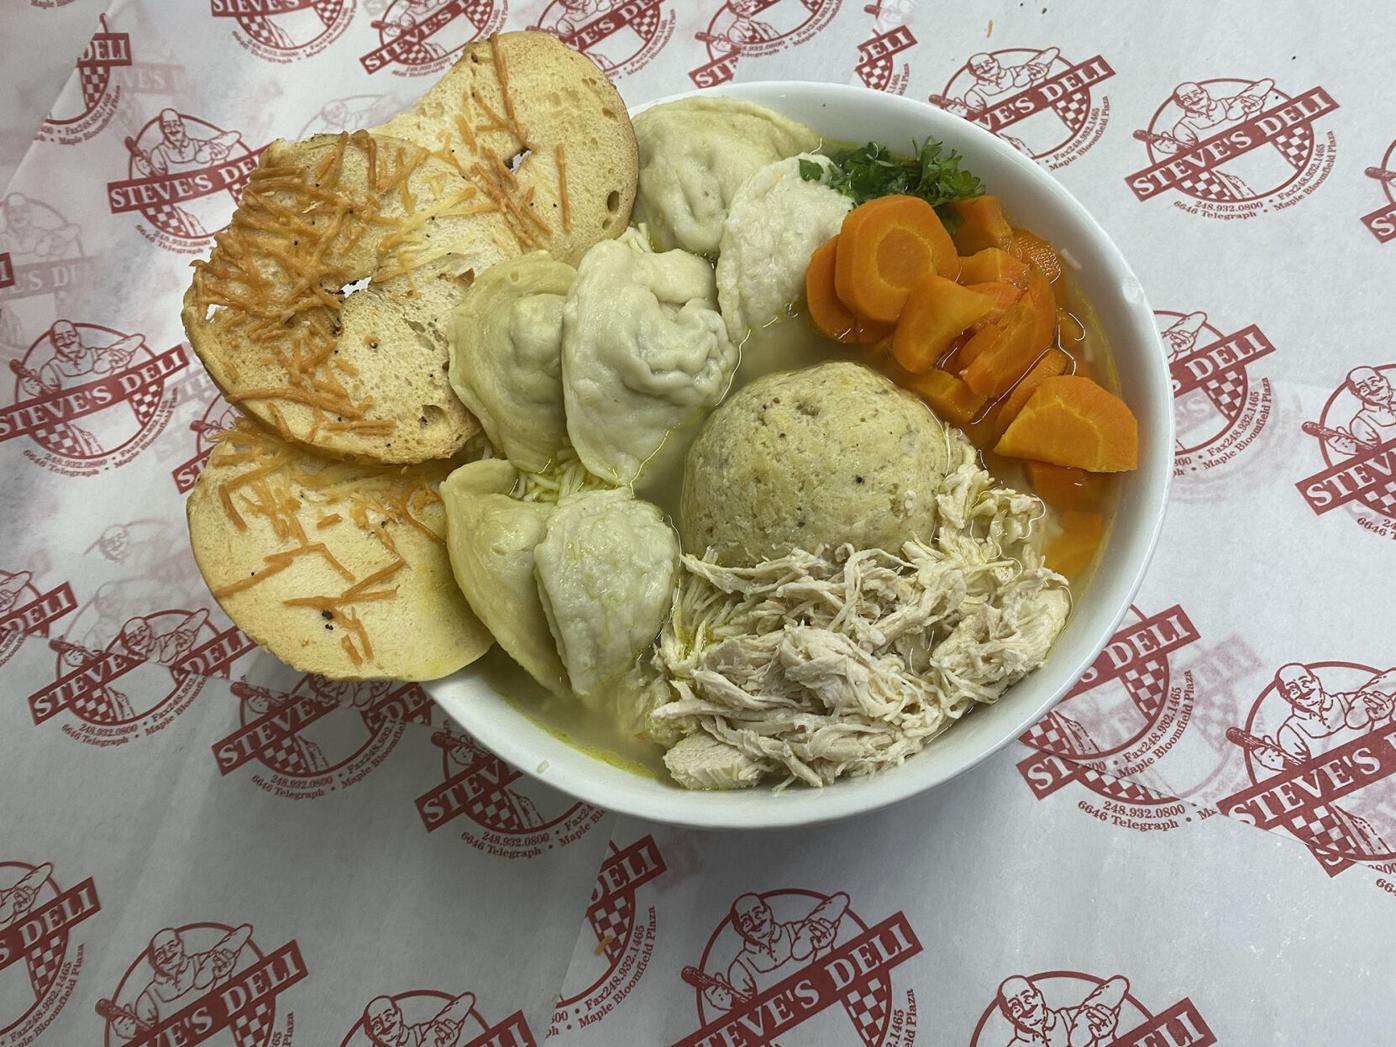 Metro Detroit Delis Serve Up a Variety of Chicken Soups for Colder